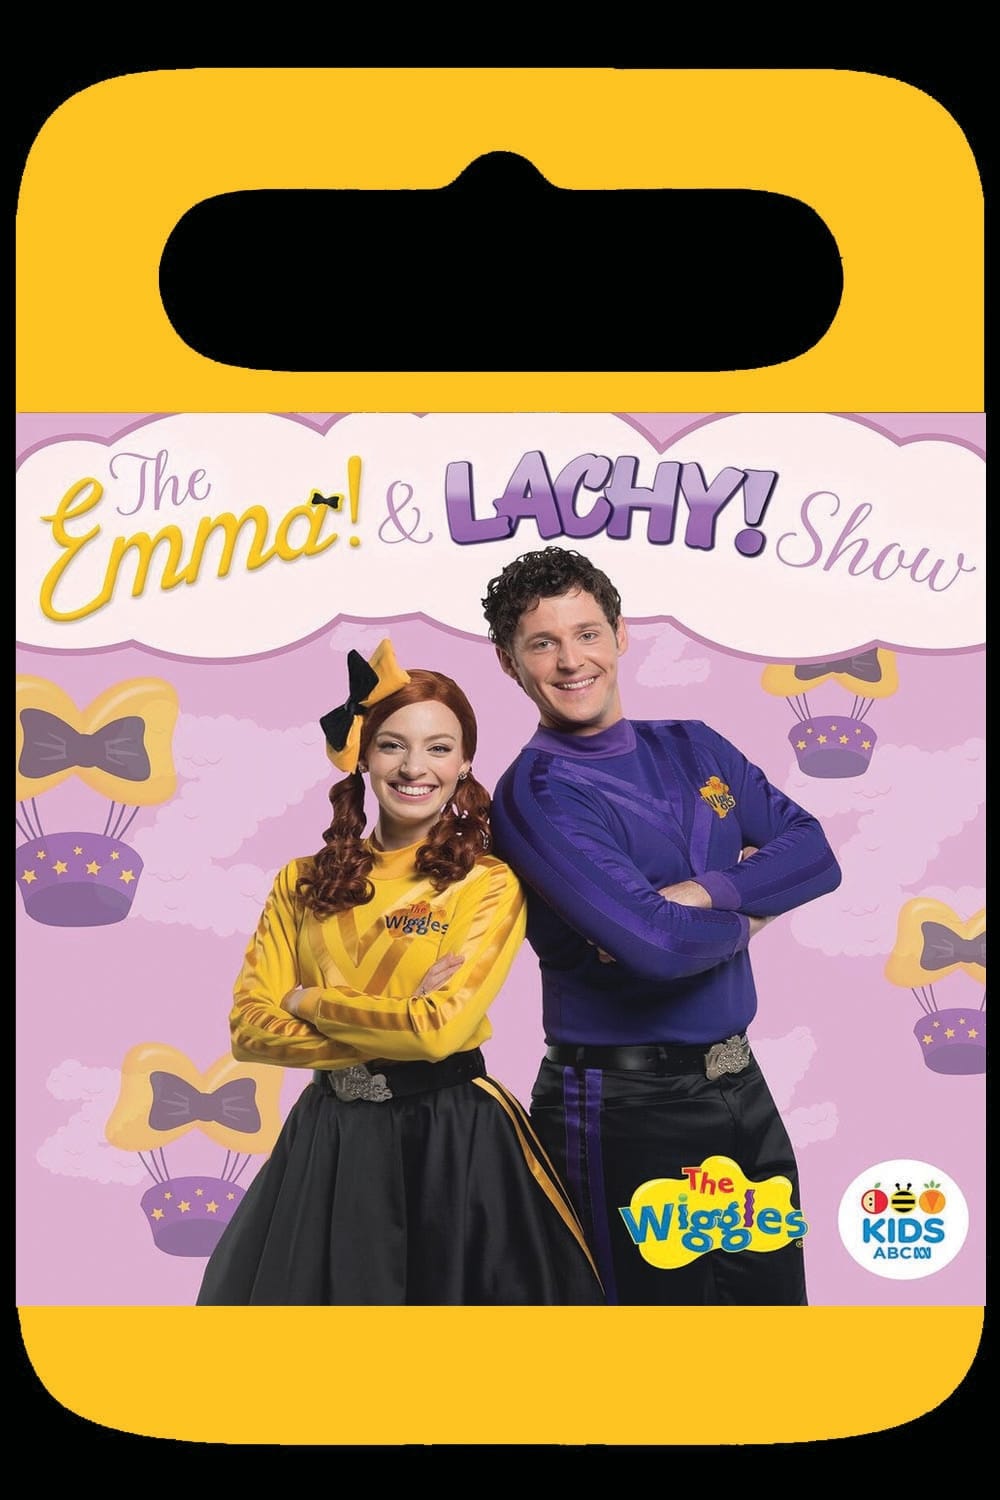 The Wiggles - The Emma & Lachy Show